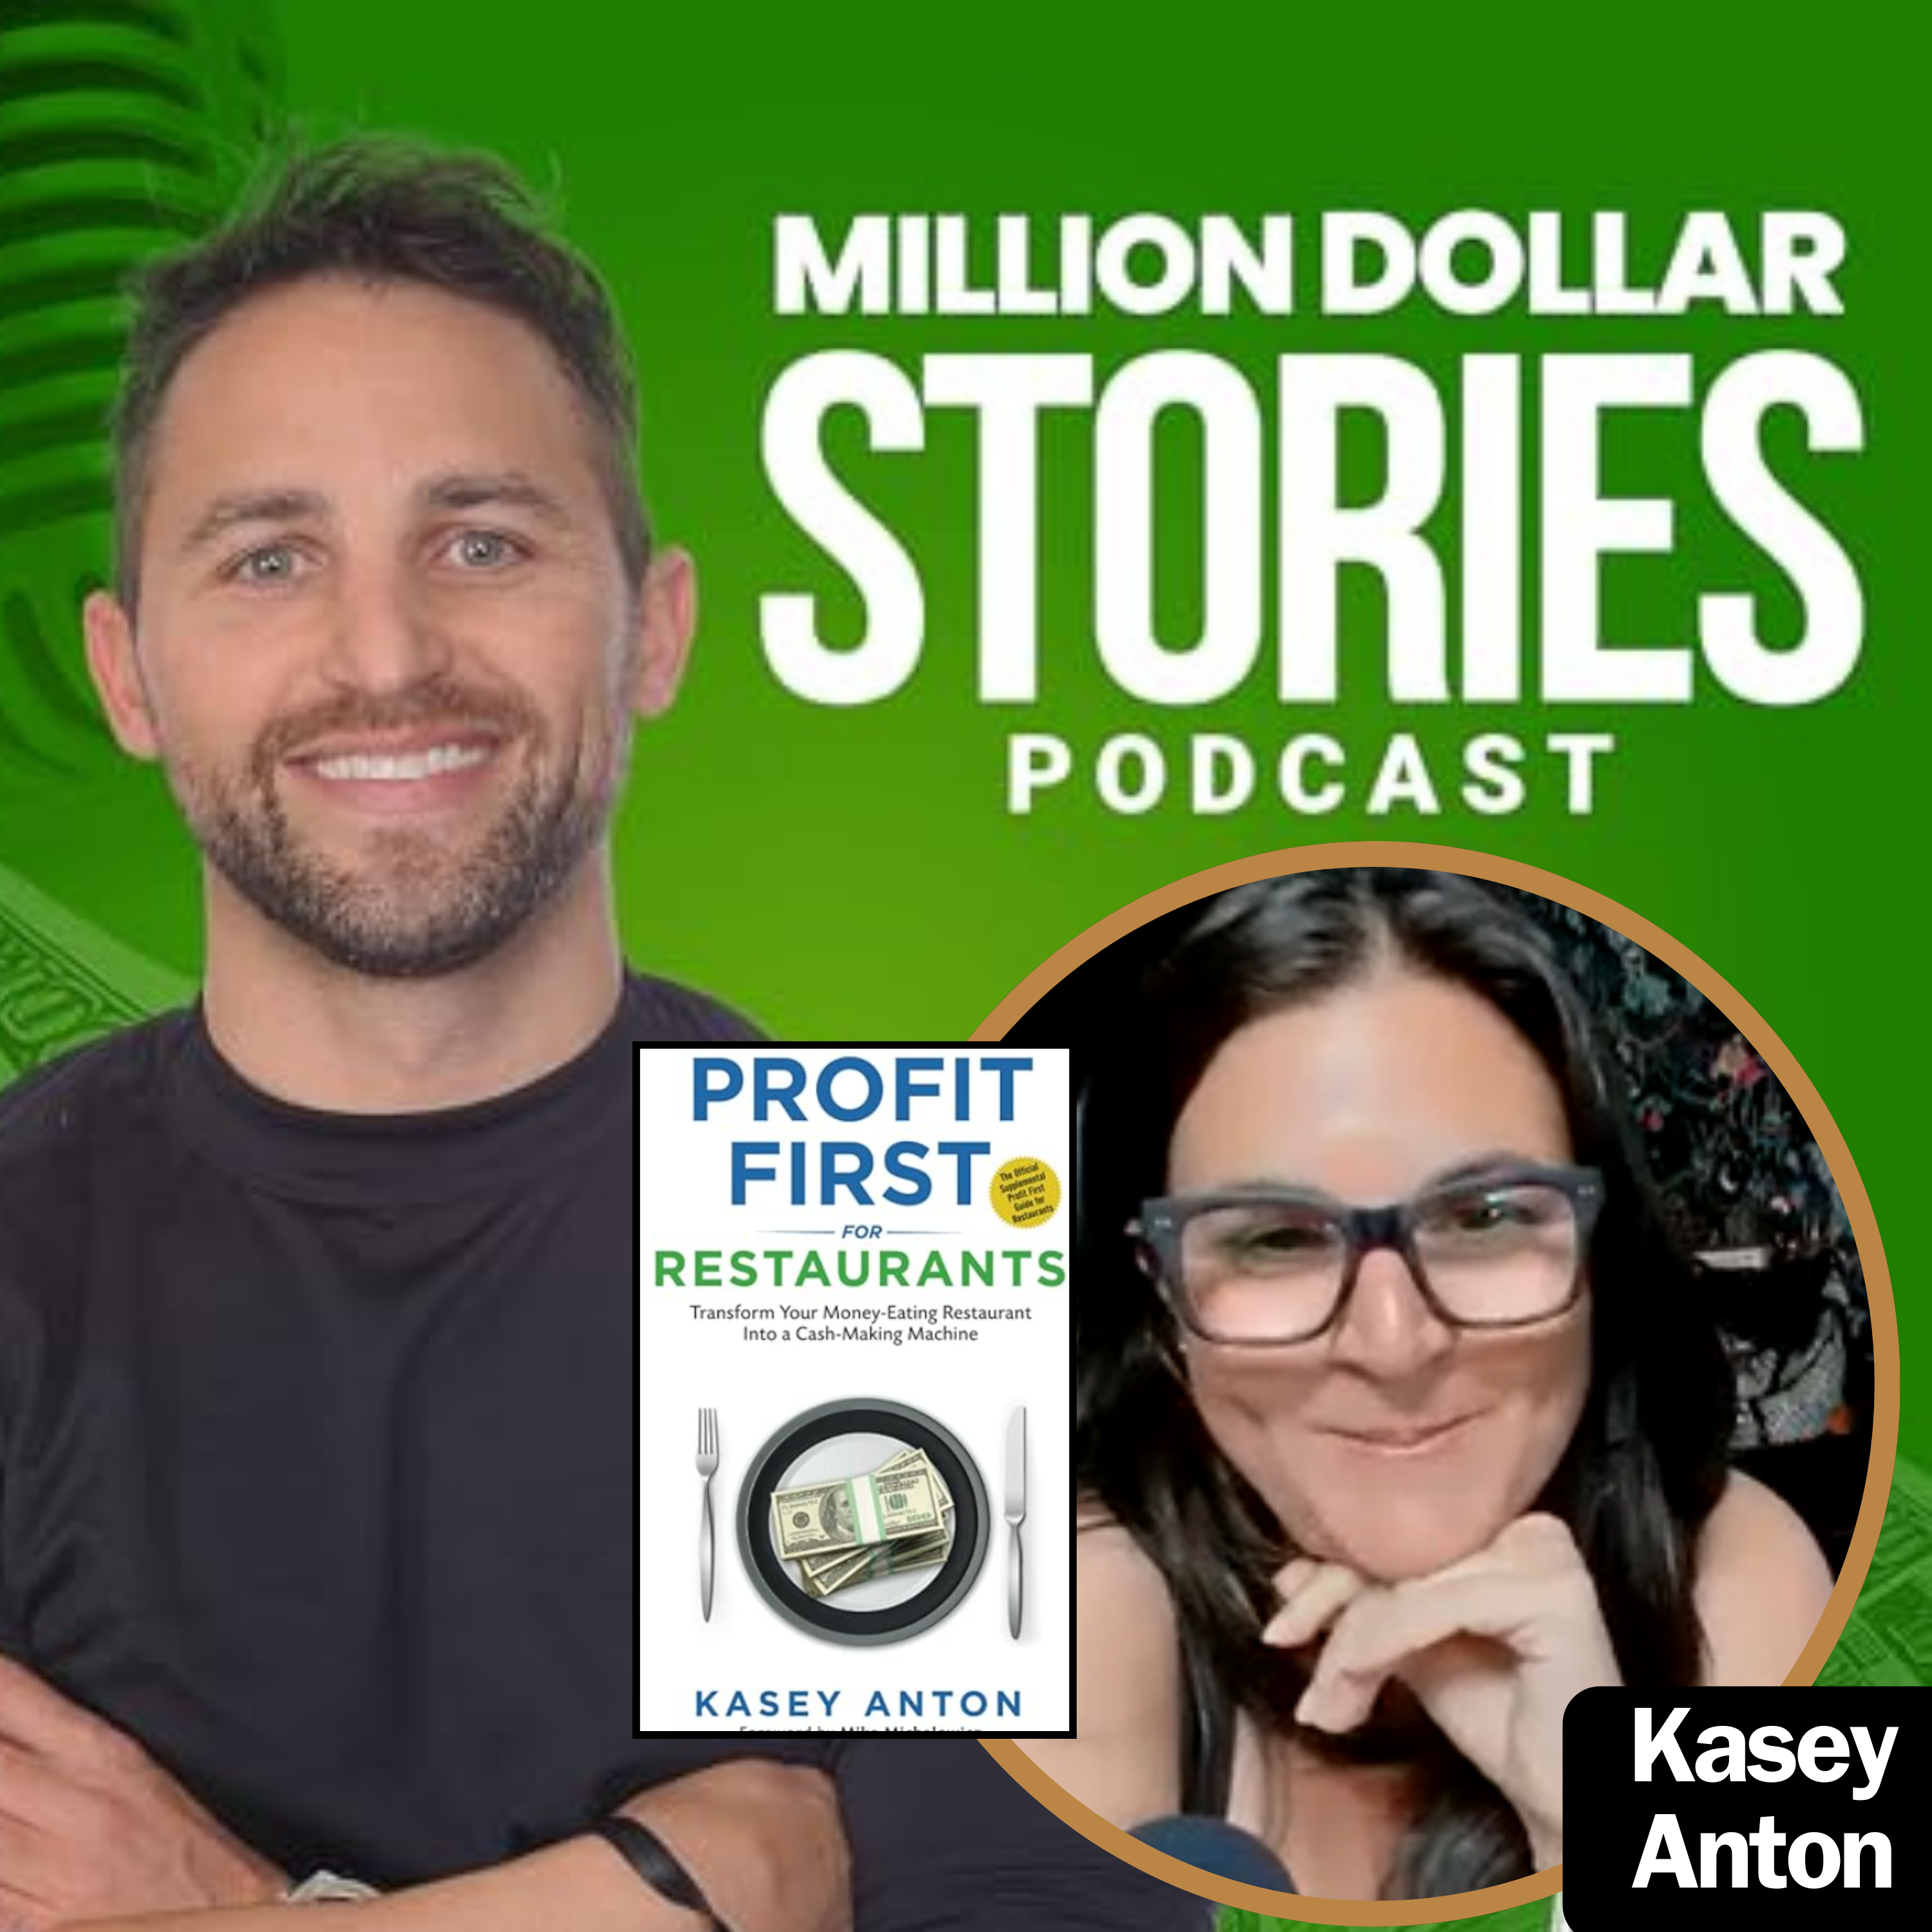 Kasey Anton – Author of “Profit First for Restaurants: Transform Your Money-Eating Restaurant Into a Cash-Making Machine”